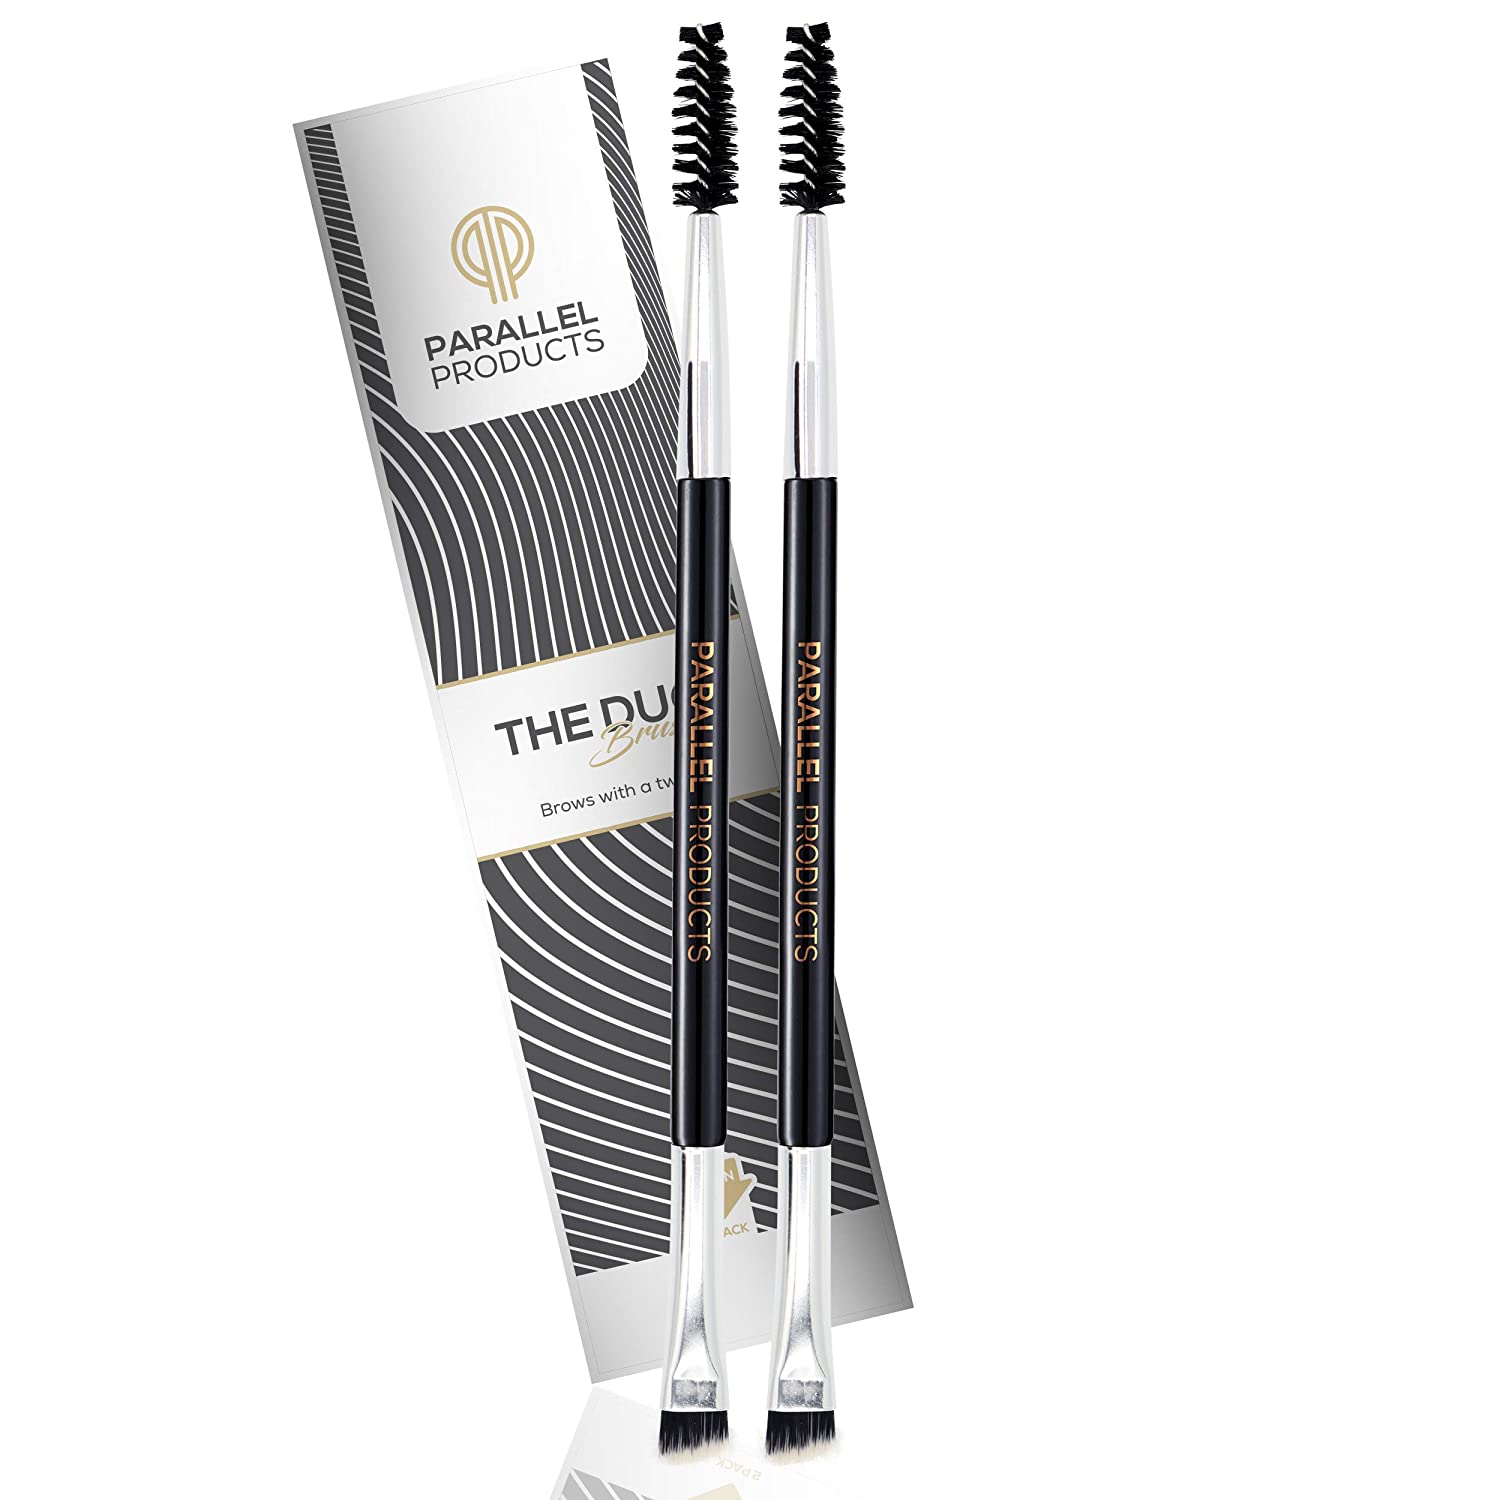 Parallel Products The Duo Brush Premium Angled Brow and Spoolie Brush Makeup Brush 2 Pack